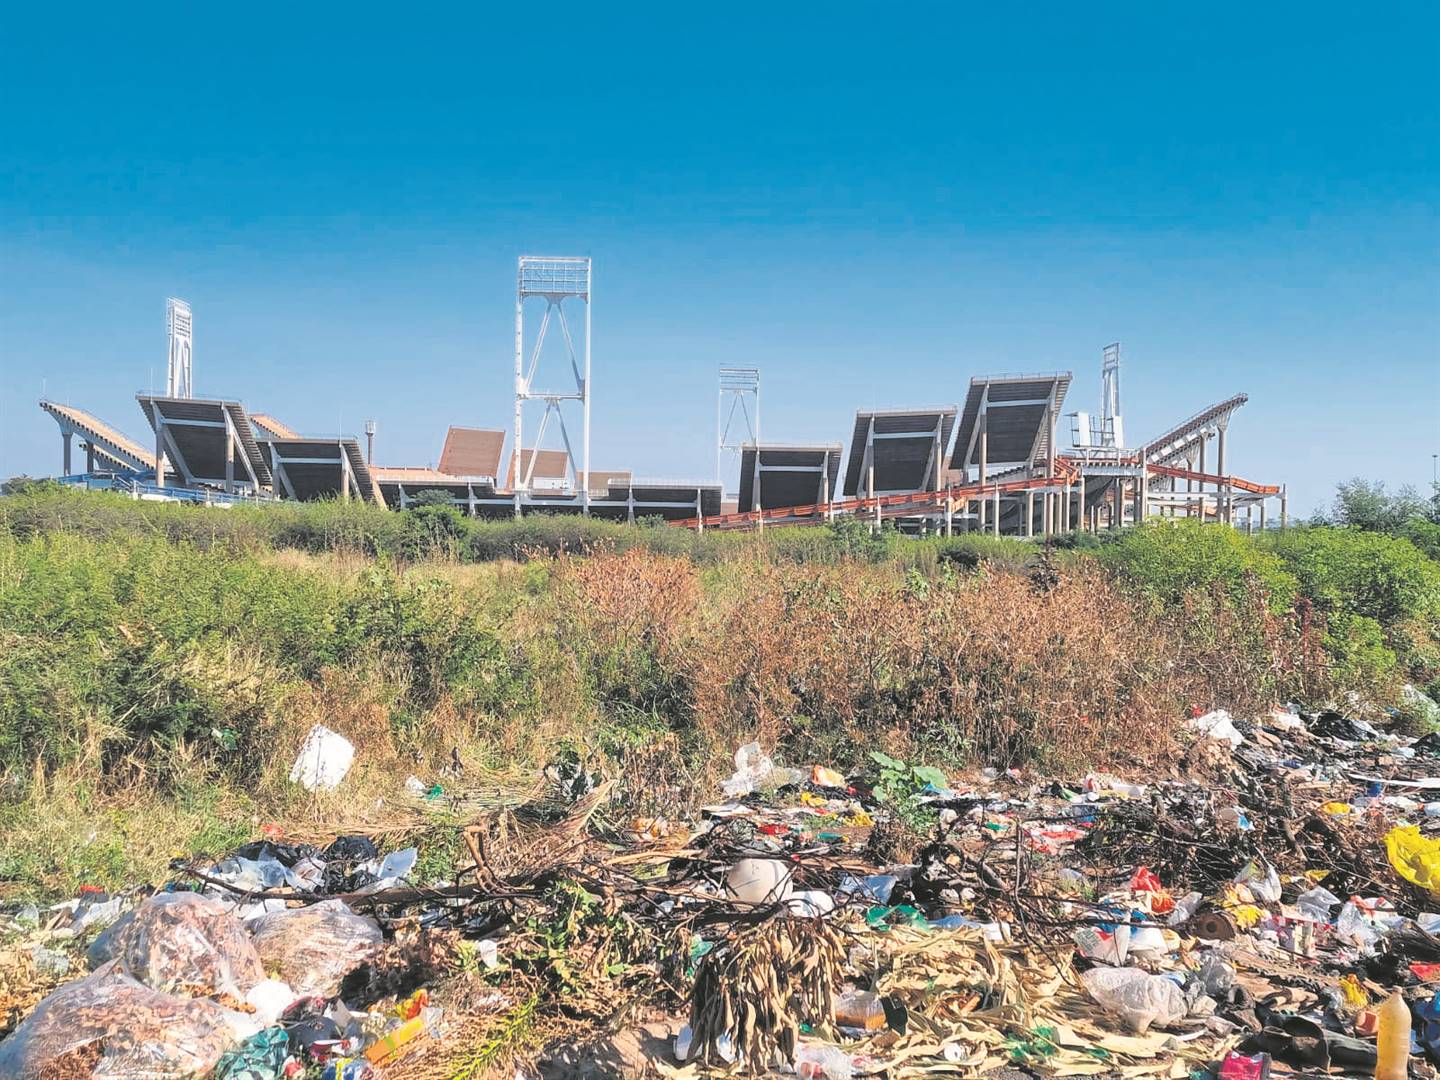 Odi Stadium is used as a dumping site by people of Mabopane.Photos by Mathews Mpete